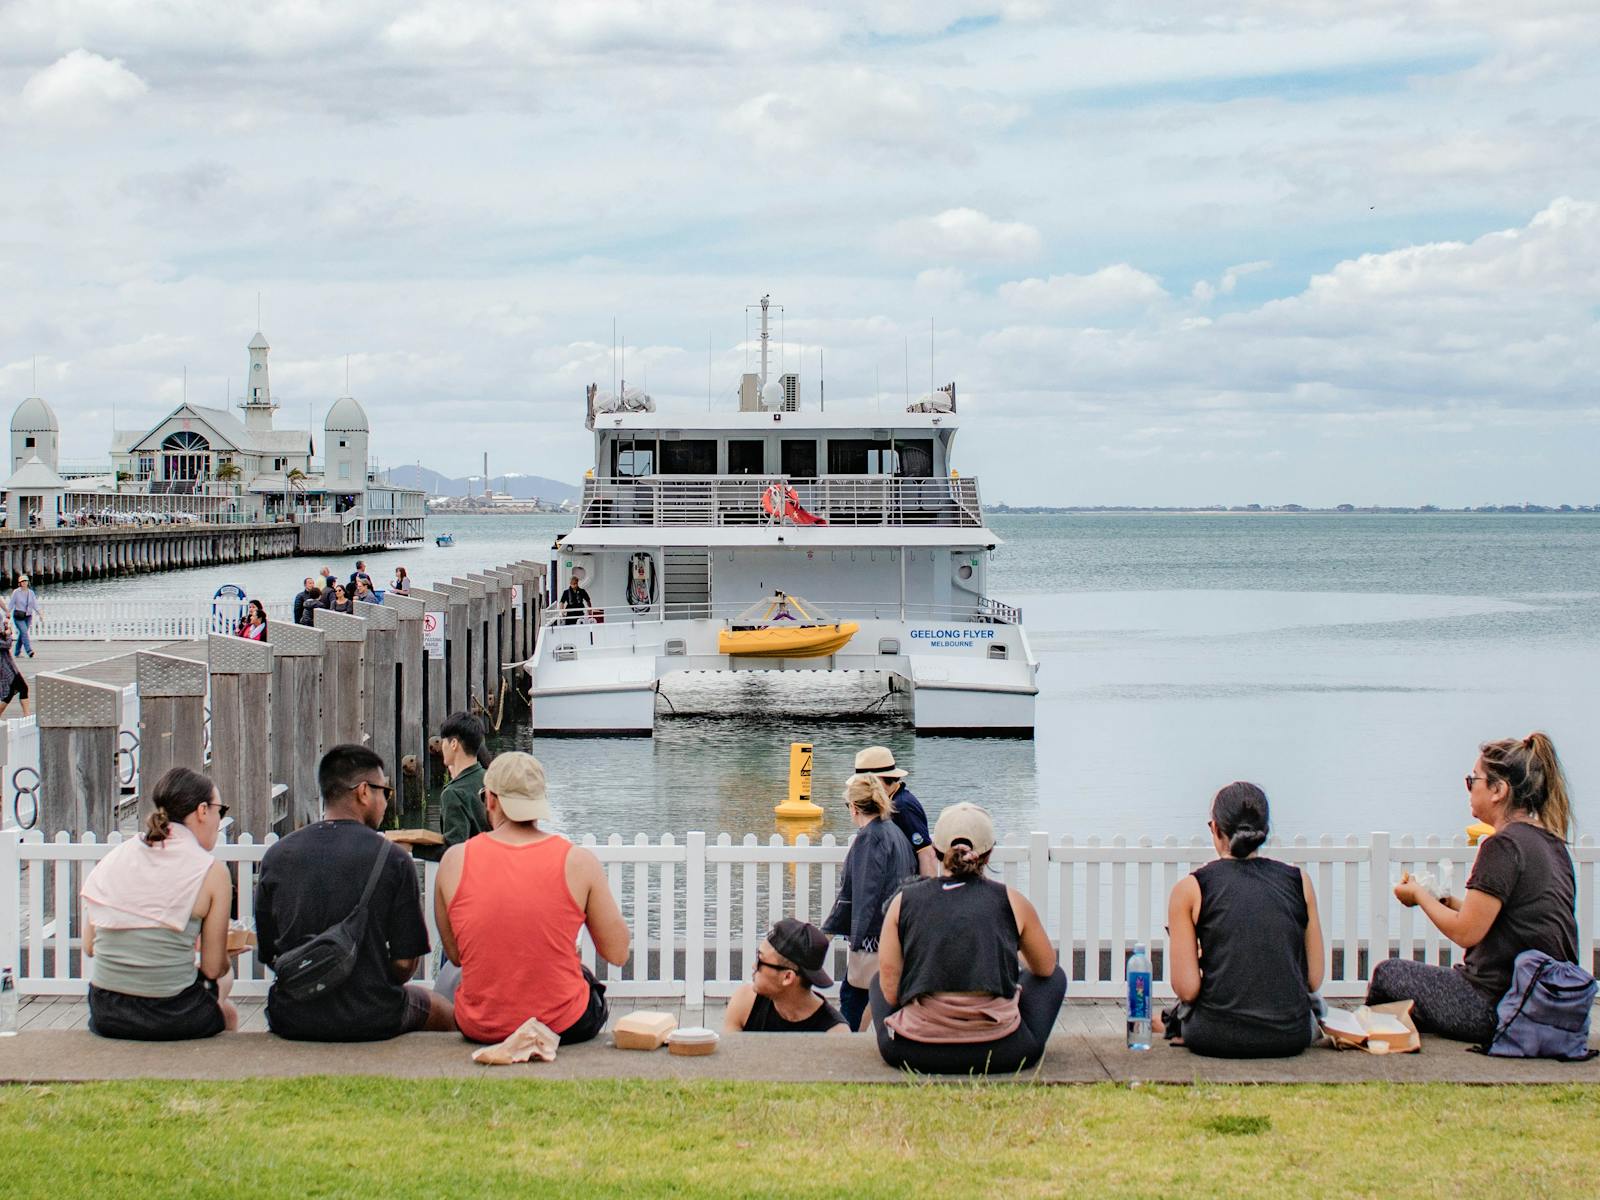 Passengers enjoying Geelong’s waterfront with ferry Geelong Flyer in the background